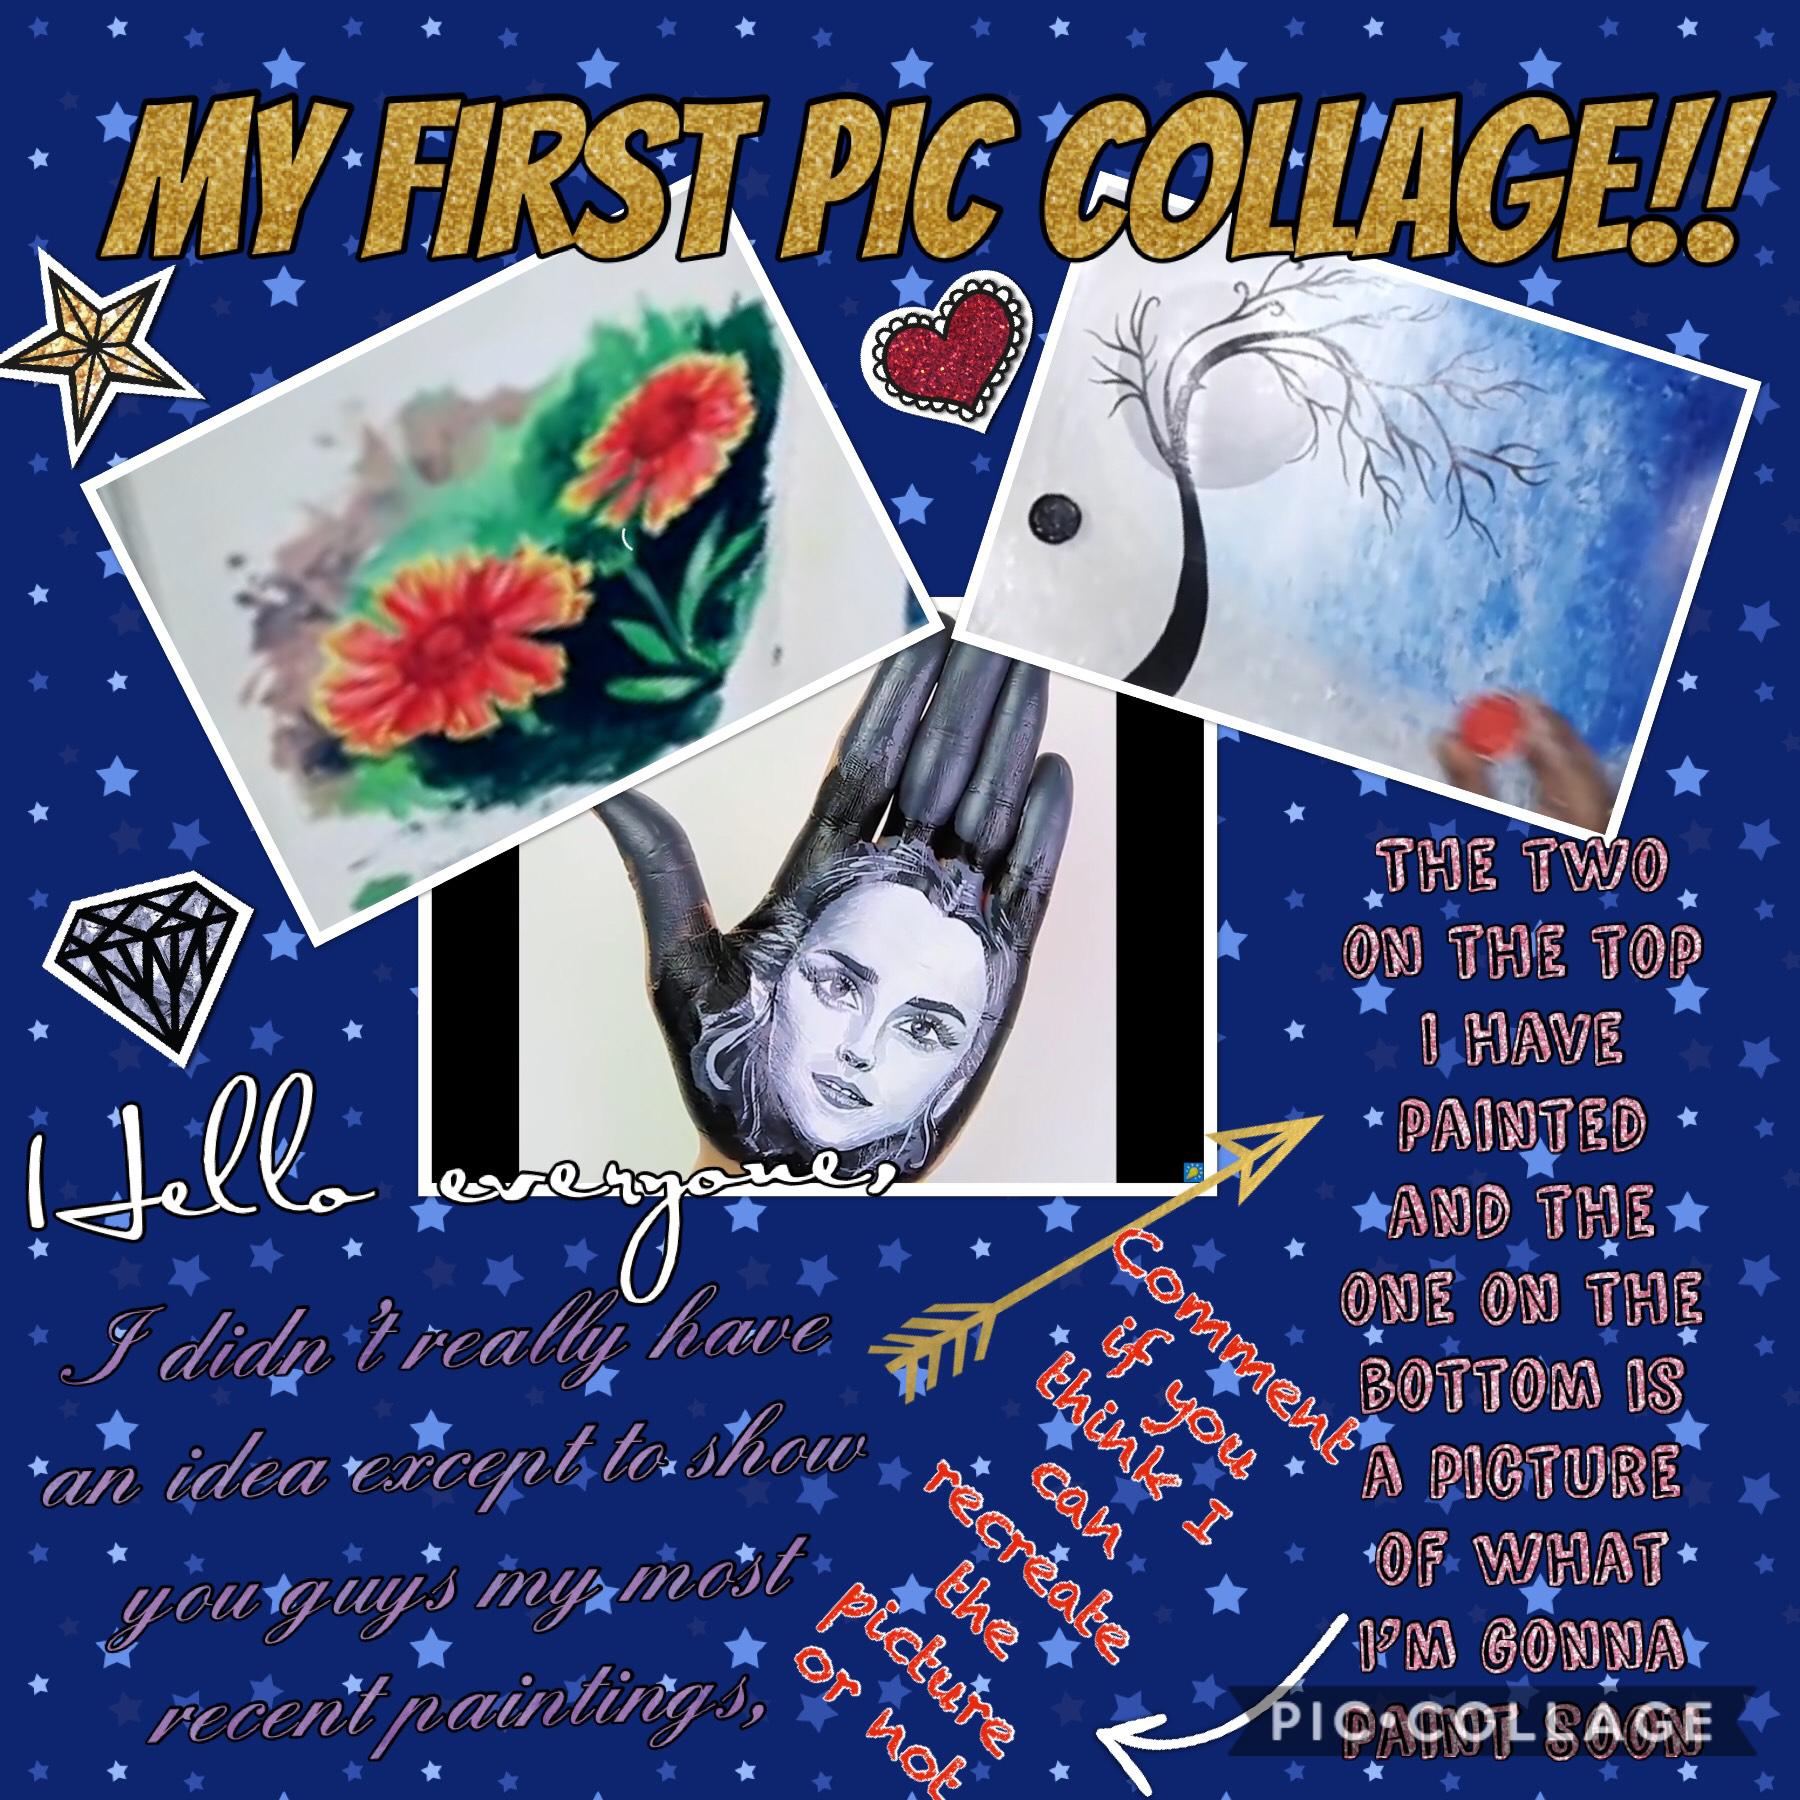 My first collage!! I have many other drawings and paintings such as Ariana grande Kylie Jenner, People in my life,etc... I will show all of them in my next collages!!!